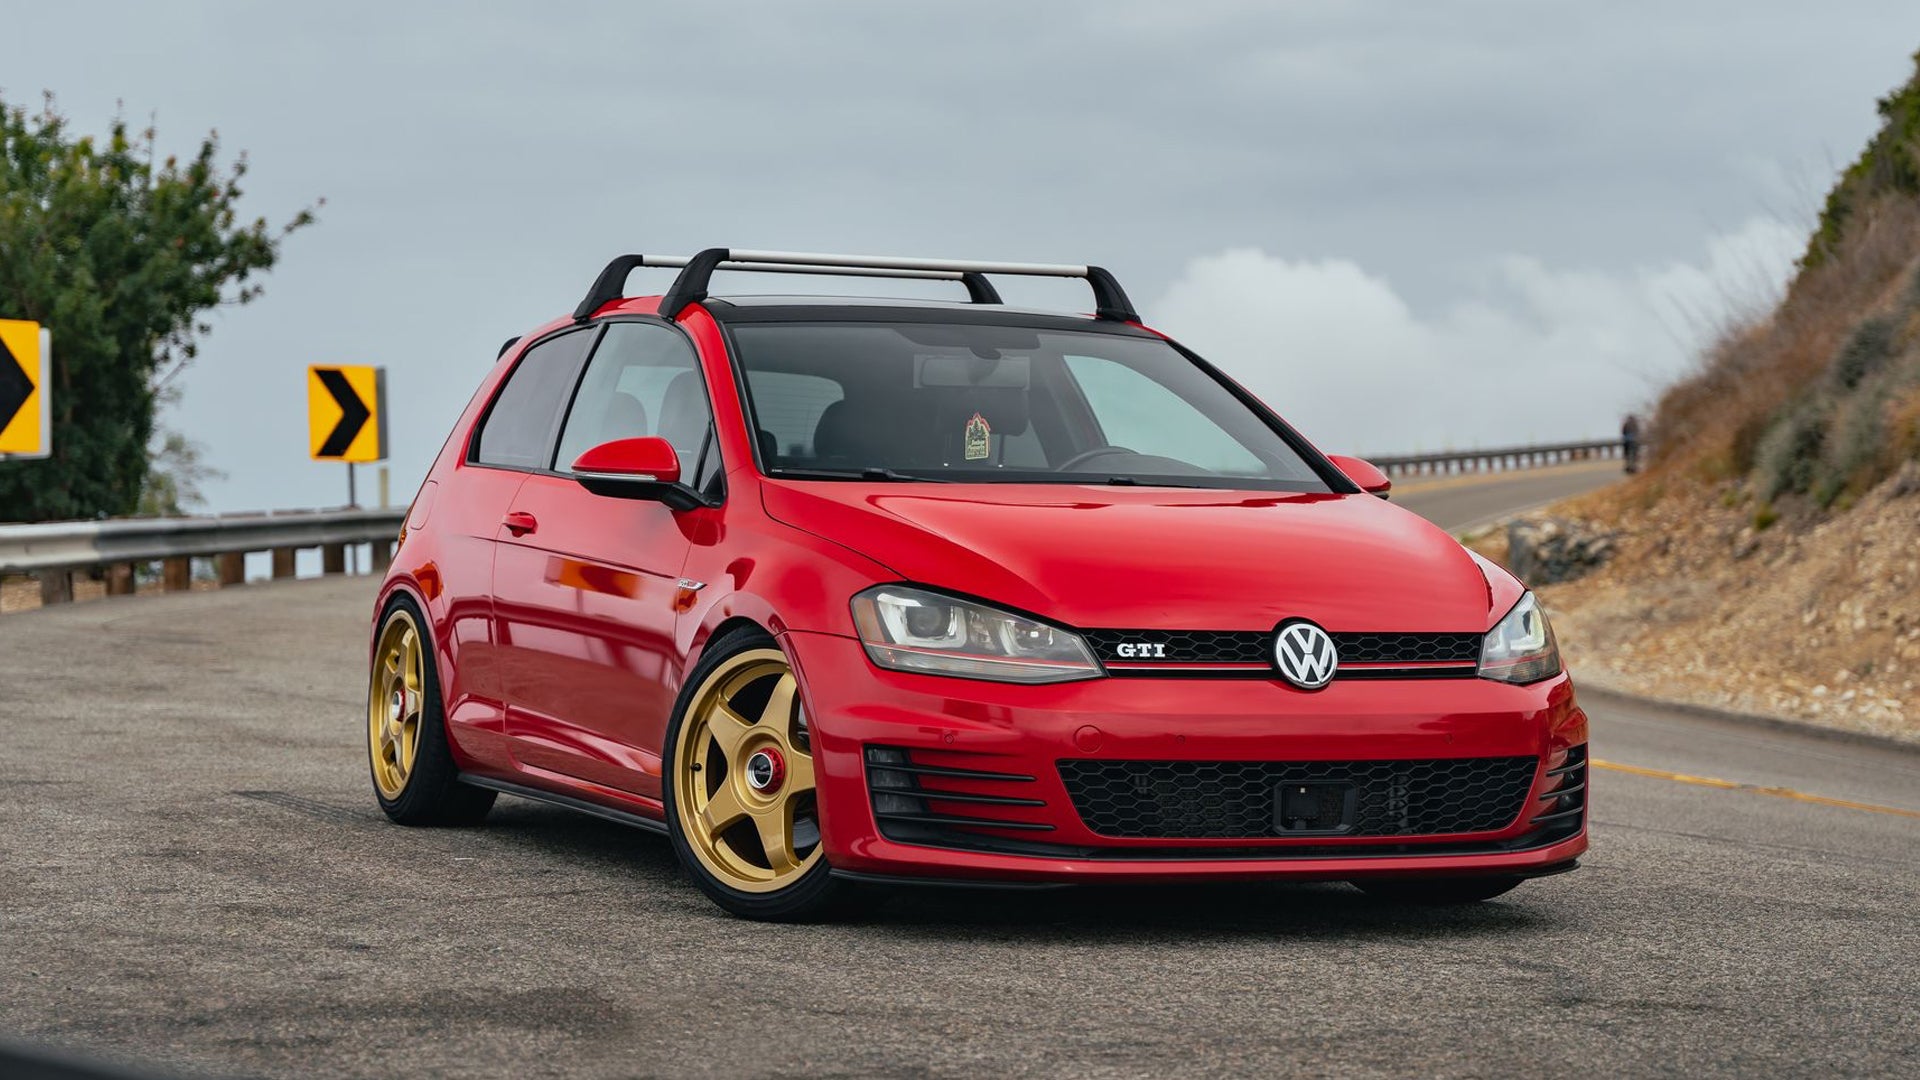 My Golf Mk7  My experience with a Volkswagen Mk7 GTI/R